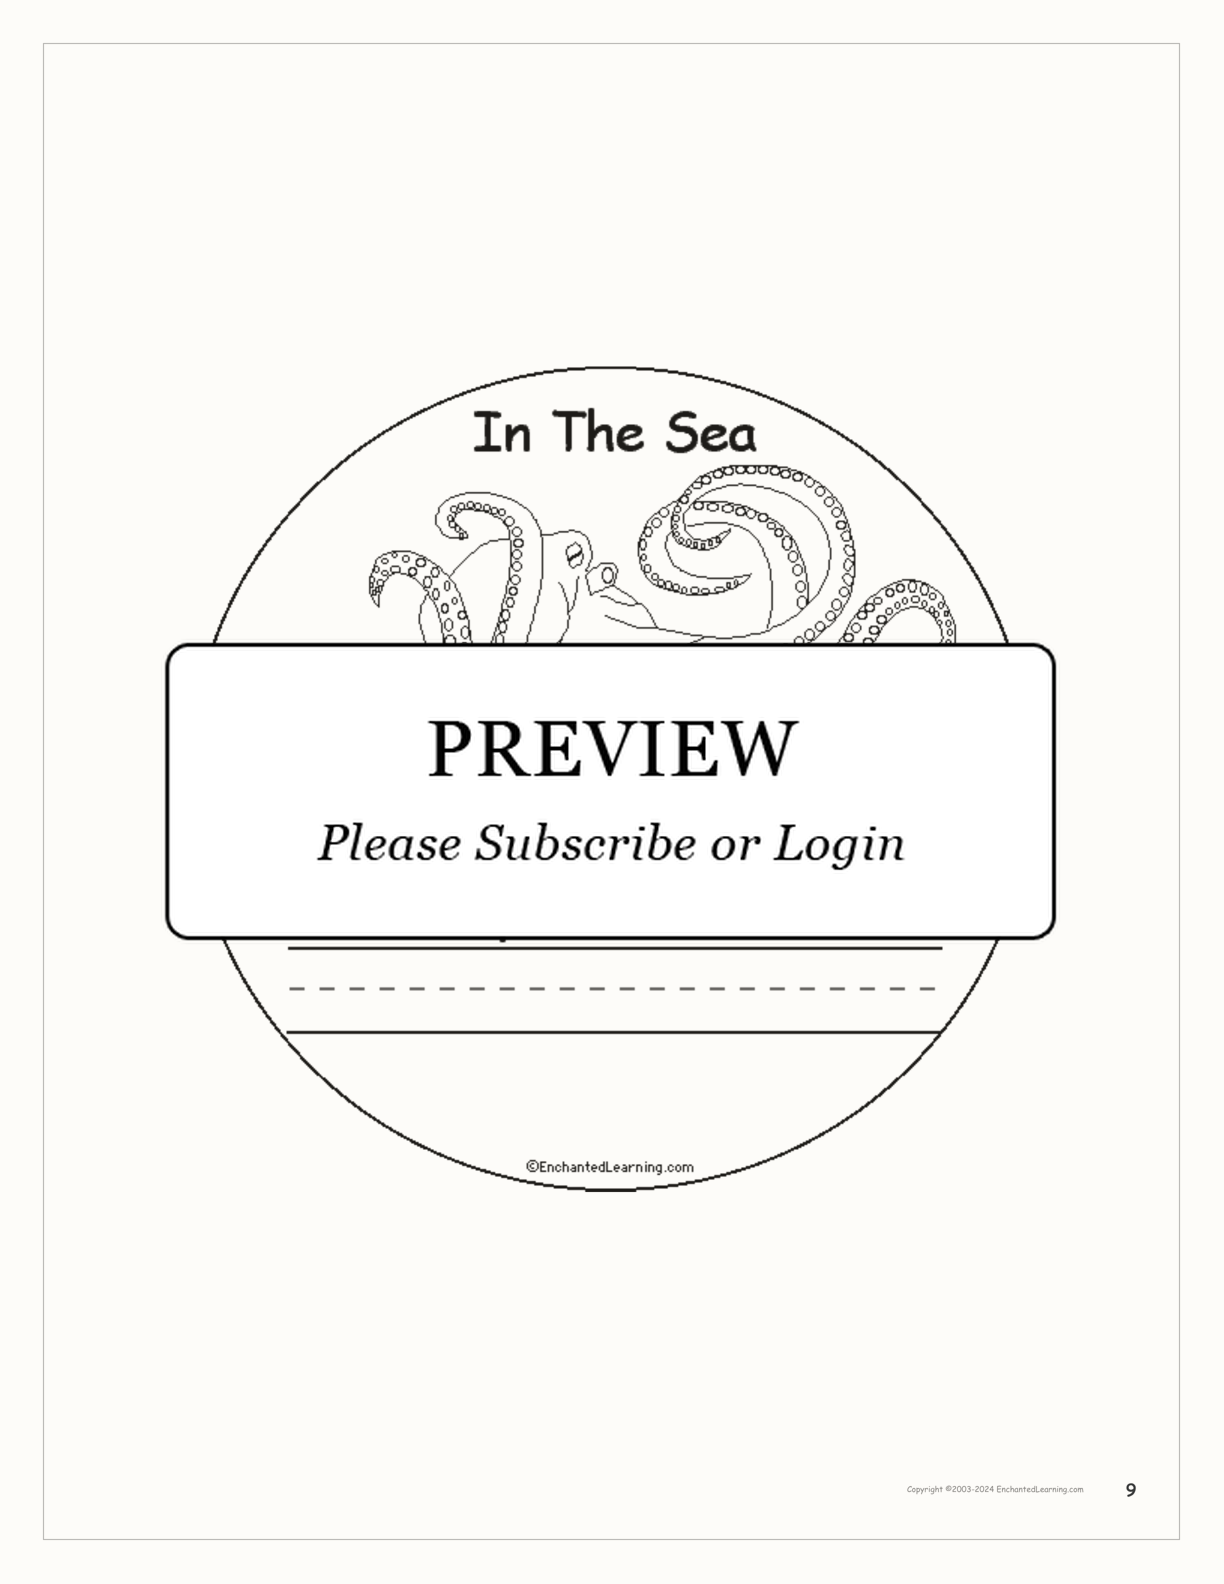 In The Sea: Early Reader Book interactive printout page 9